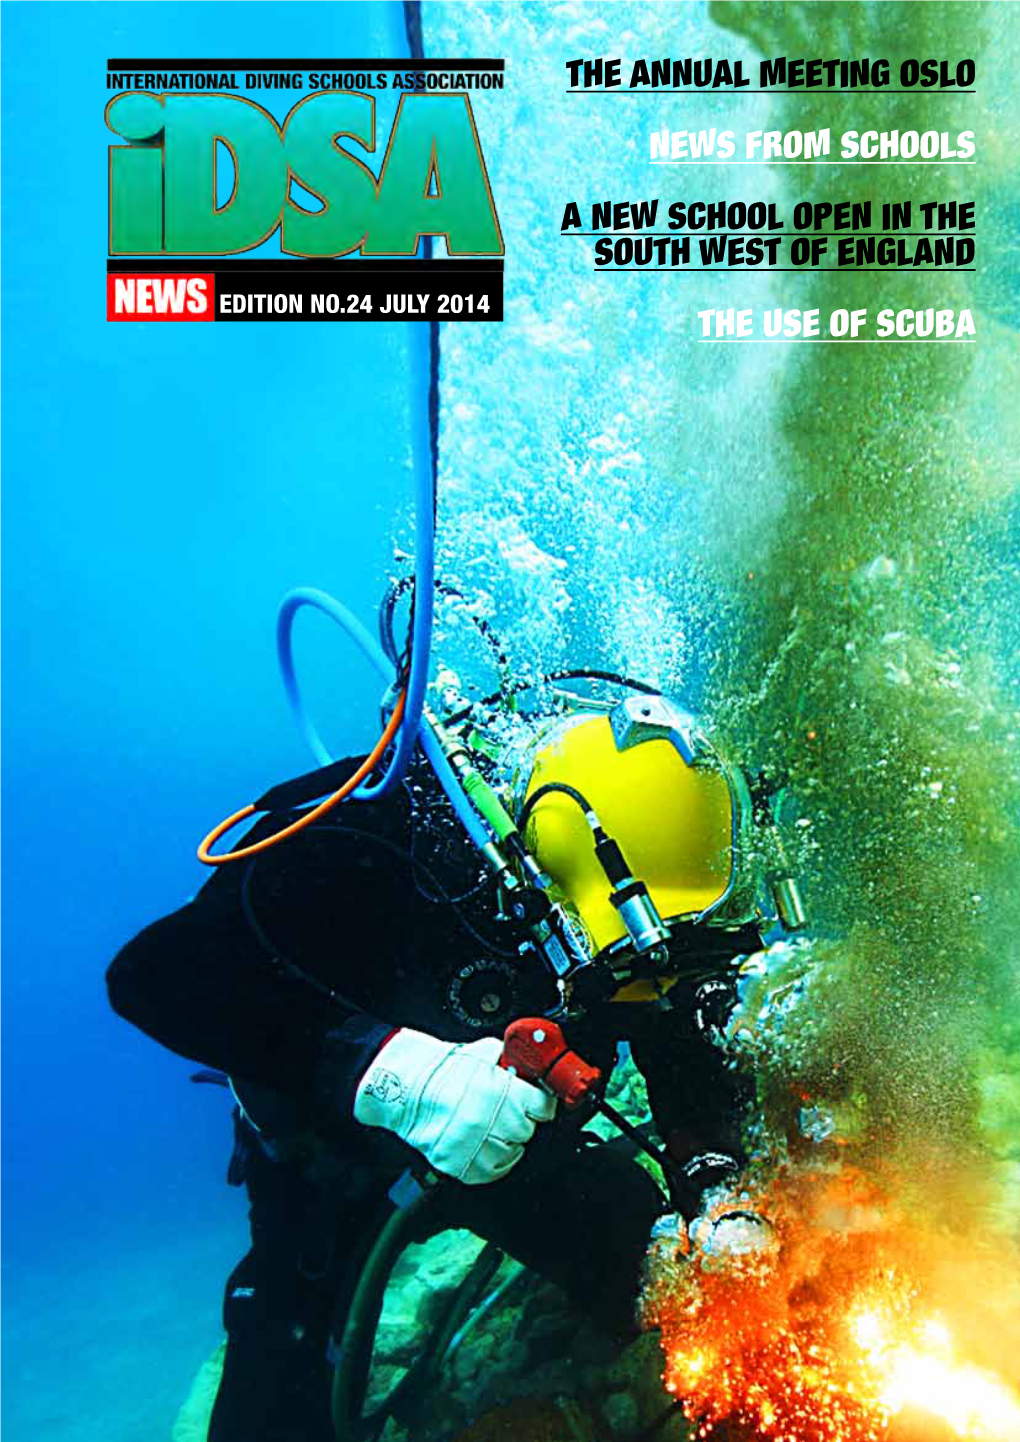 The Annual Meeting Oslo News from Schools a New School Open in the South West of England Edition No.24 July 2014 the Use of Scuba